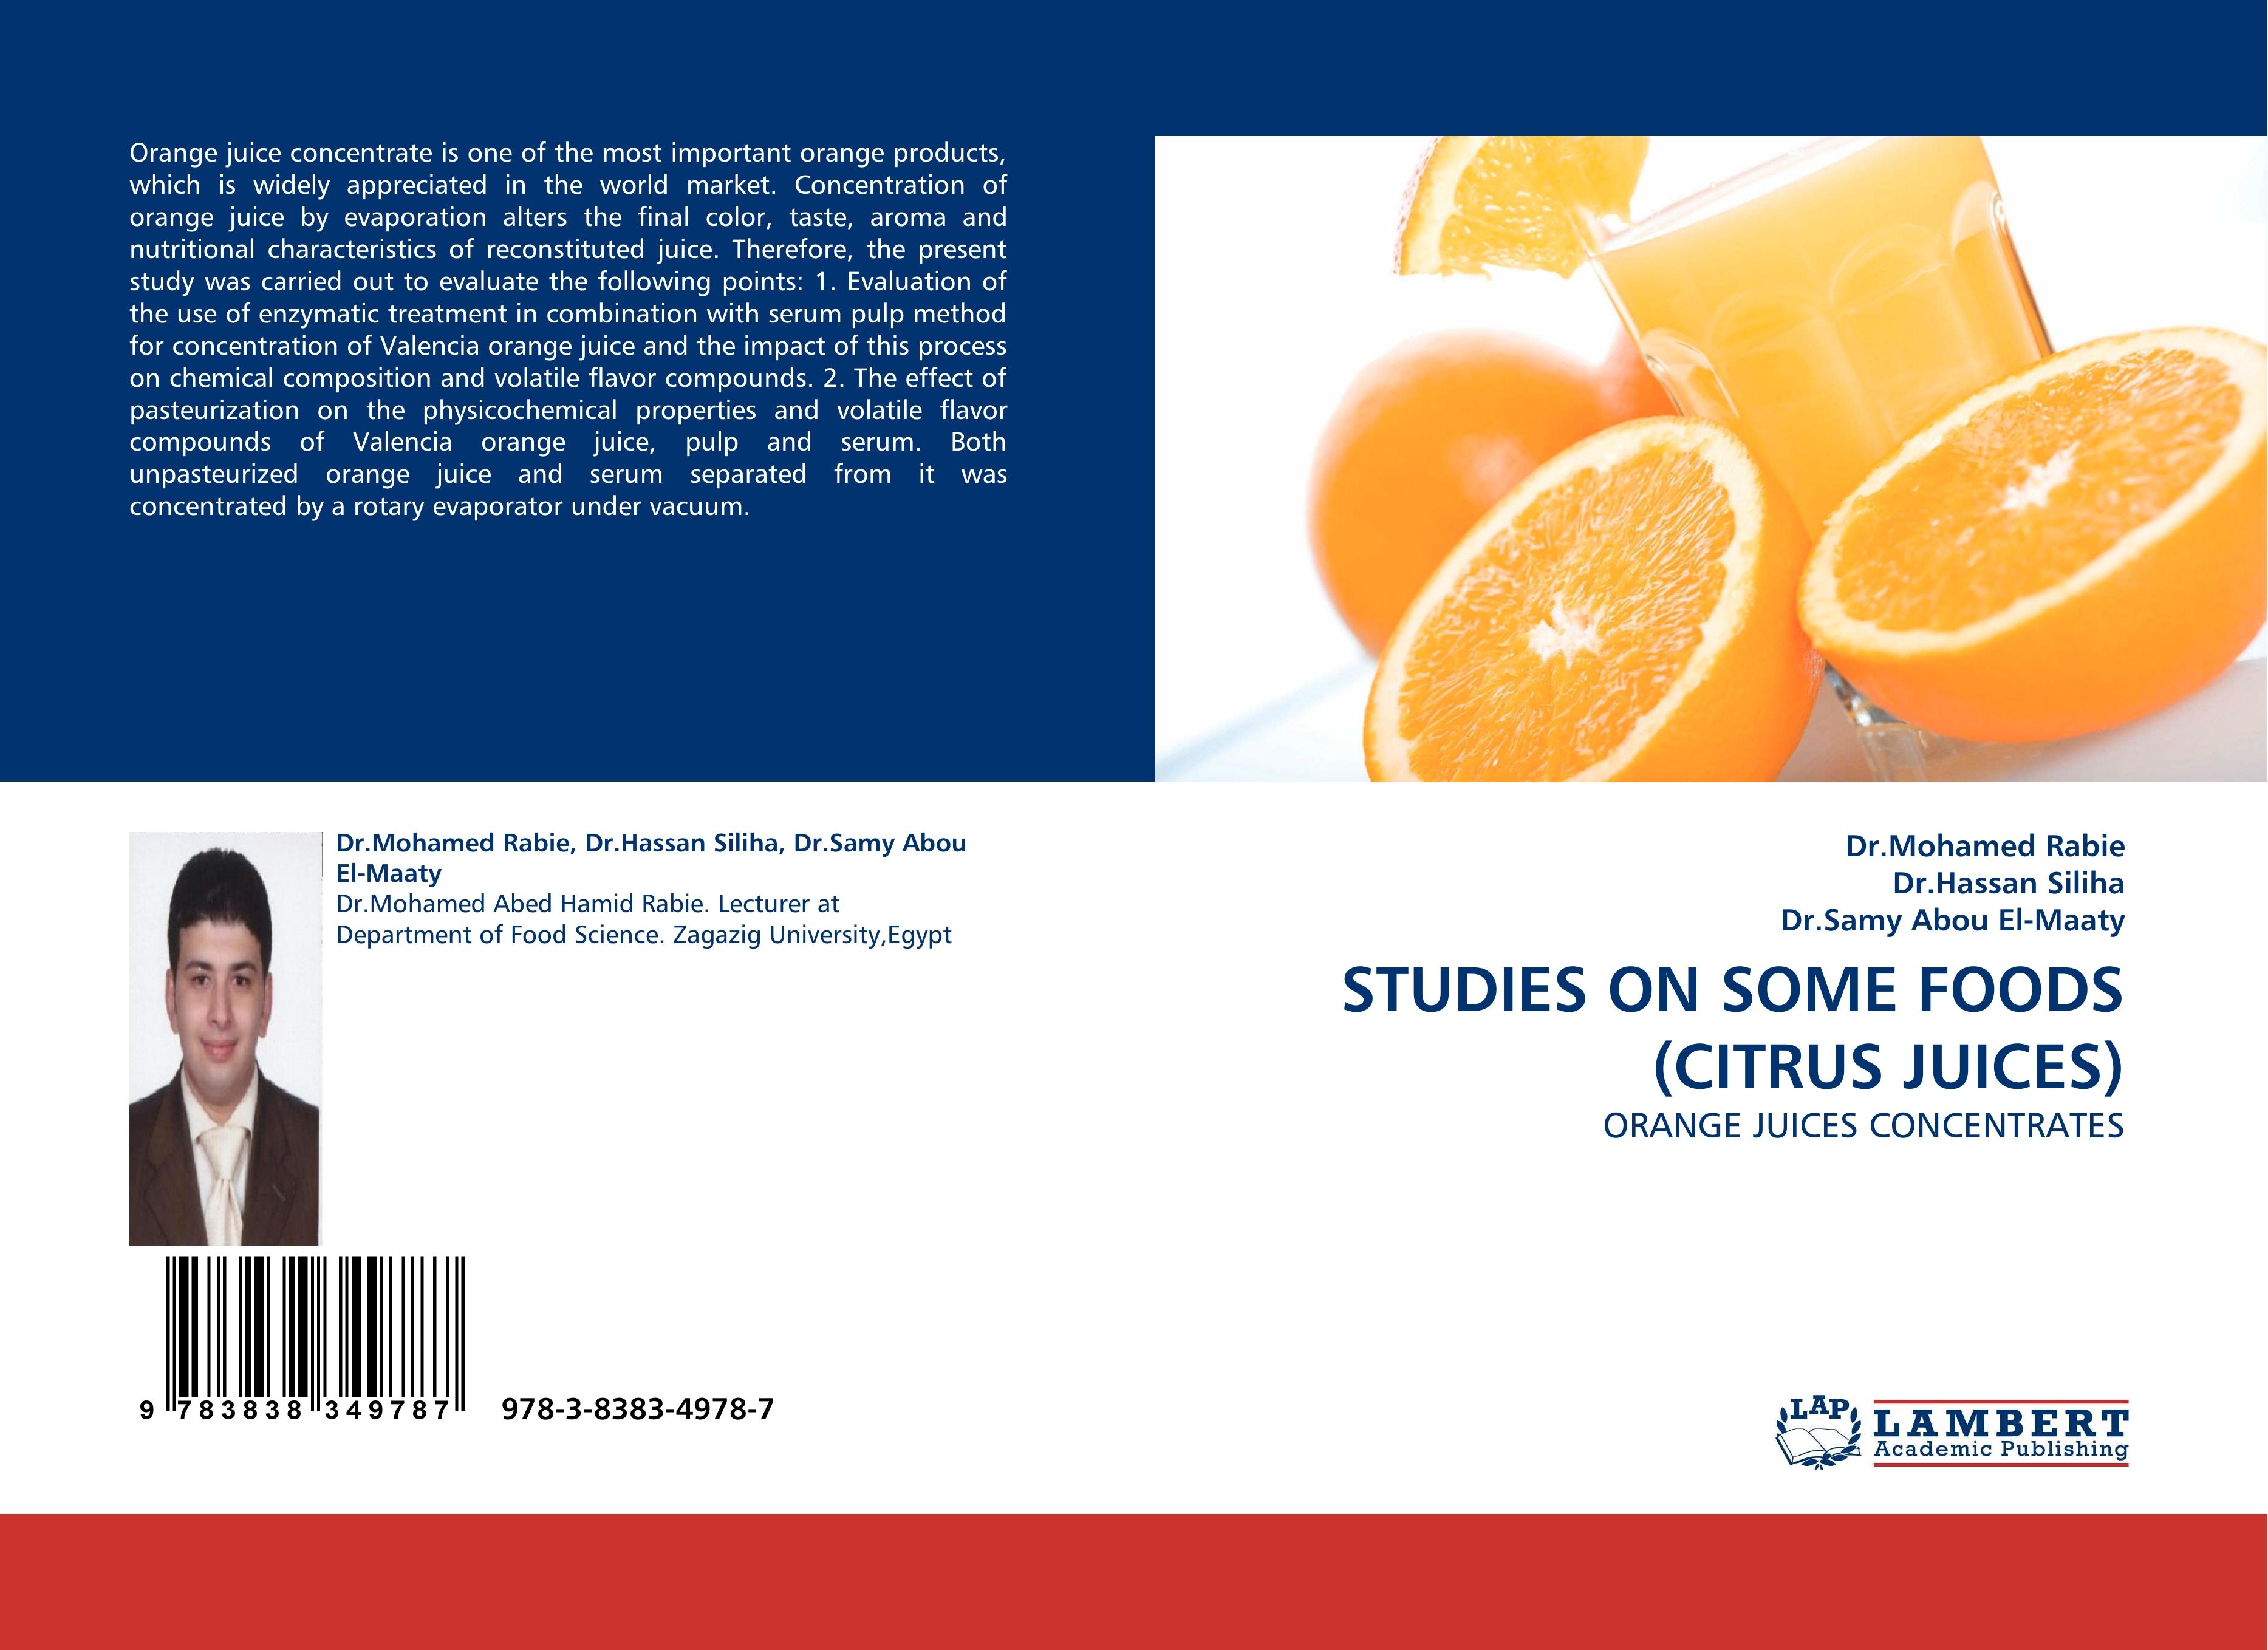 STUDIES ON SOME FOODS (CITRUS JUICES) - Dr.Mohamed Rabie Dr.Hassan Siliha Dr.Samy Abou El-Maaty